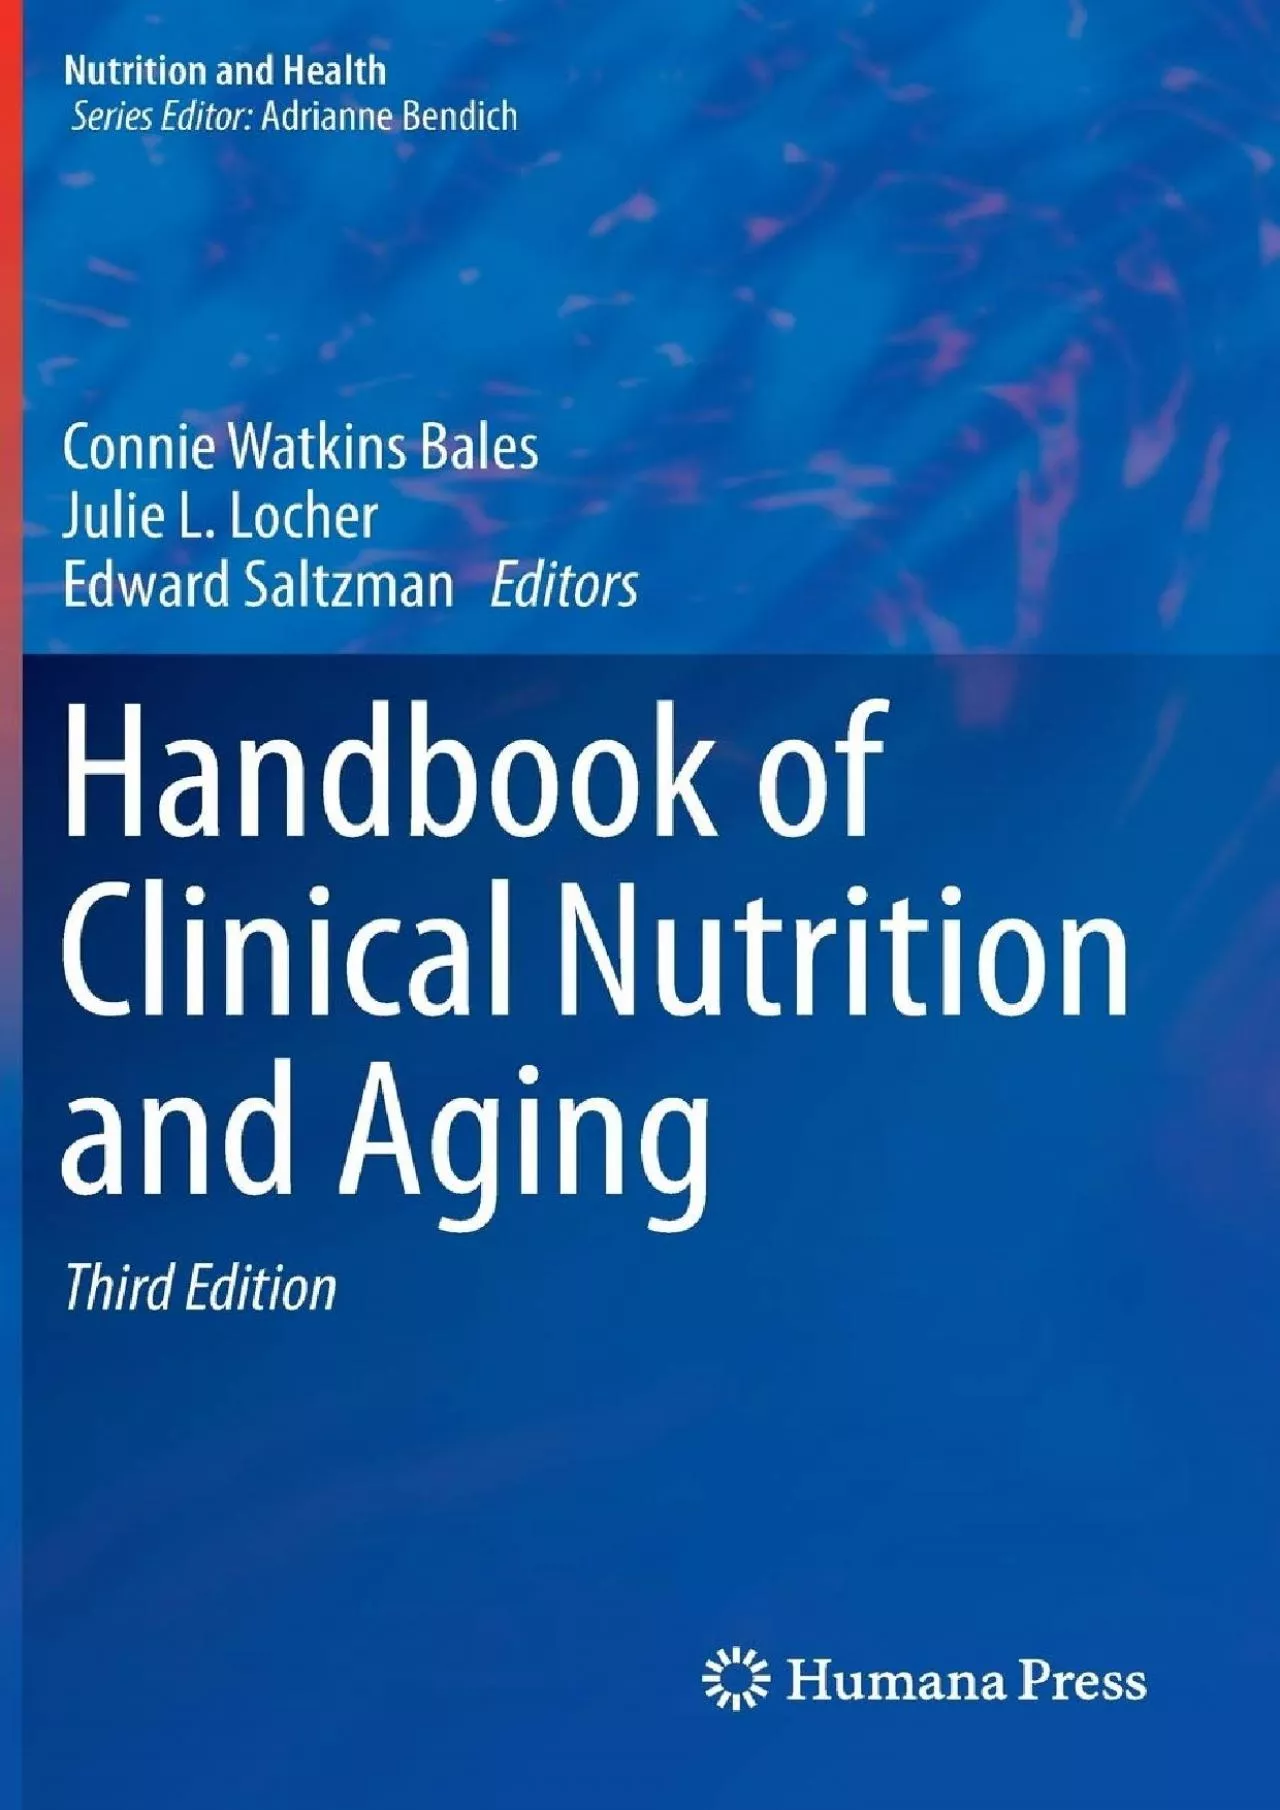 (BOOK)-Handbook of Clinical Nutrition and Aging (Nutrition and Health)